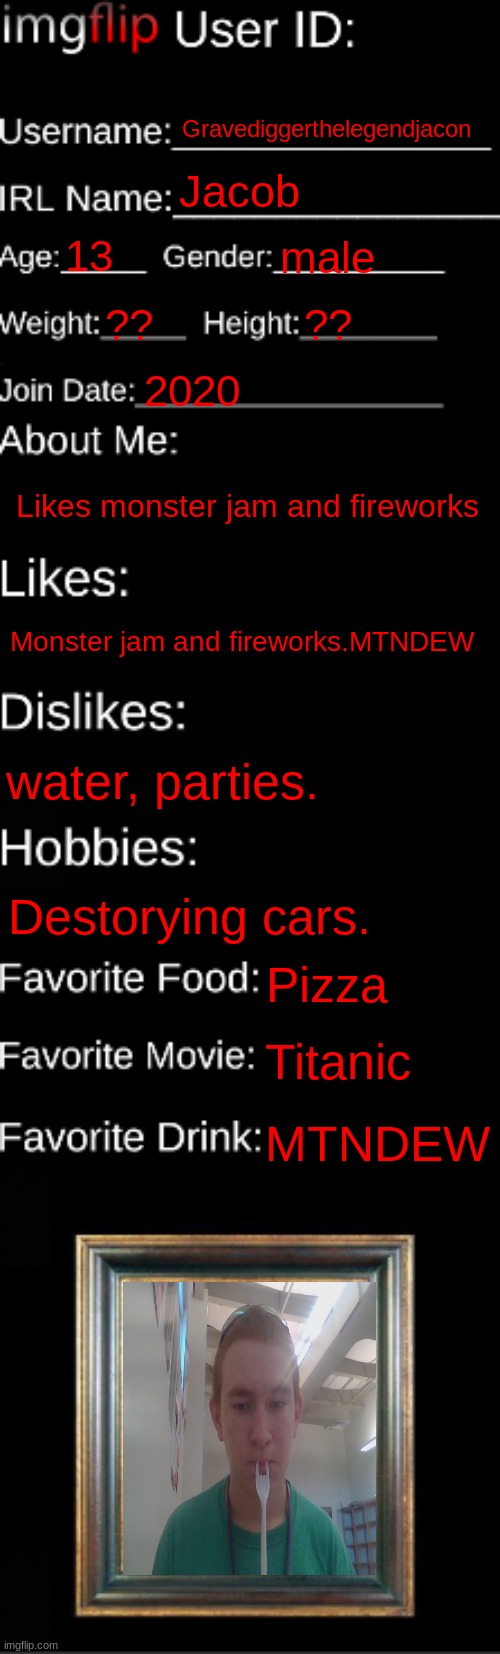 imgflip ID Card | Gravediggerthelegendjacon; Jacob; 13; male; ?? ?? 2020; Likes monster jam and fireworks; Monster jam and fireworks.MTNDEW; water, parties. Destorying cars. Pizza; Titanic; MTNDEW | image tagged in imgflip id card | made w/ Imgflip meme maker